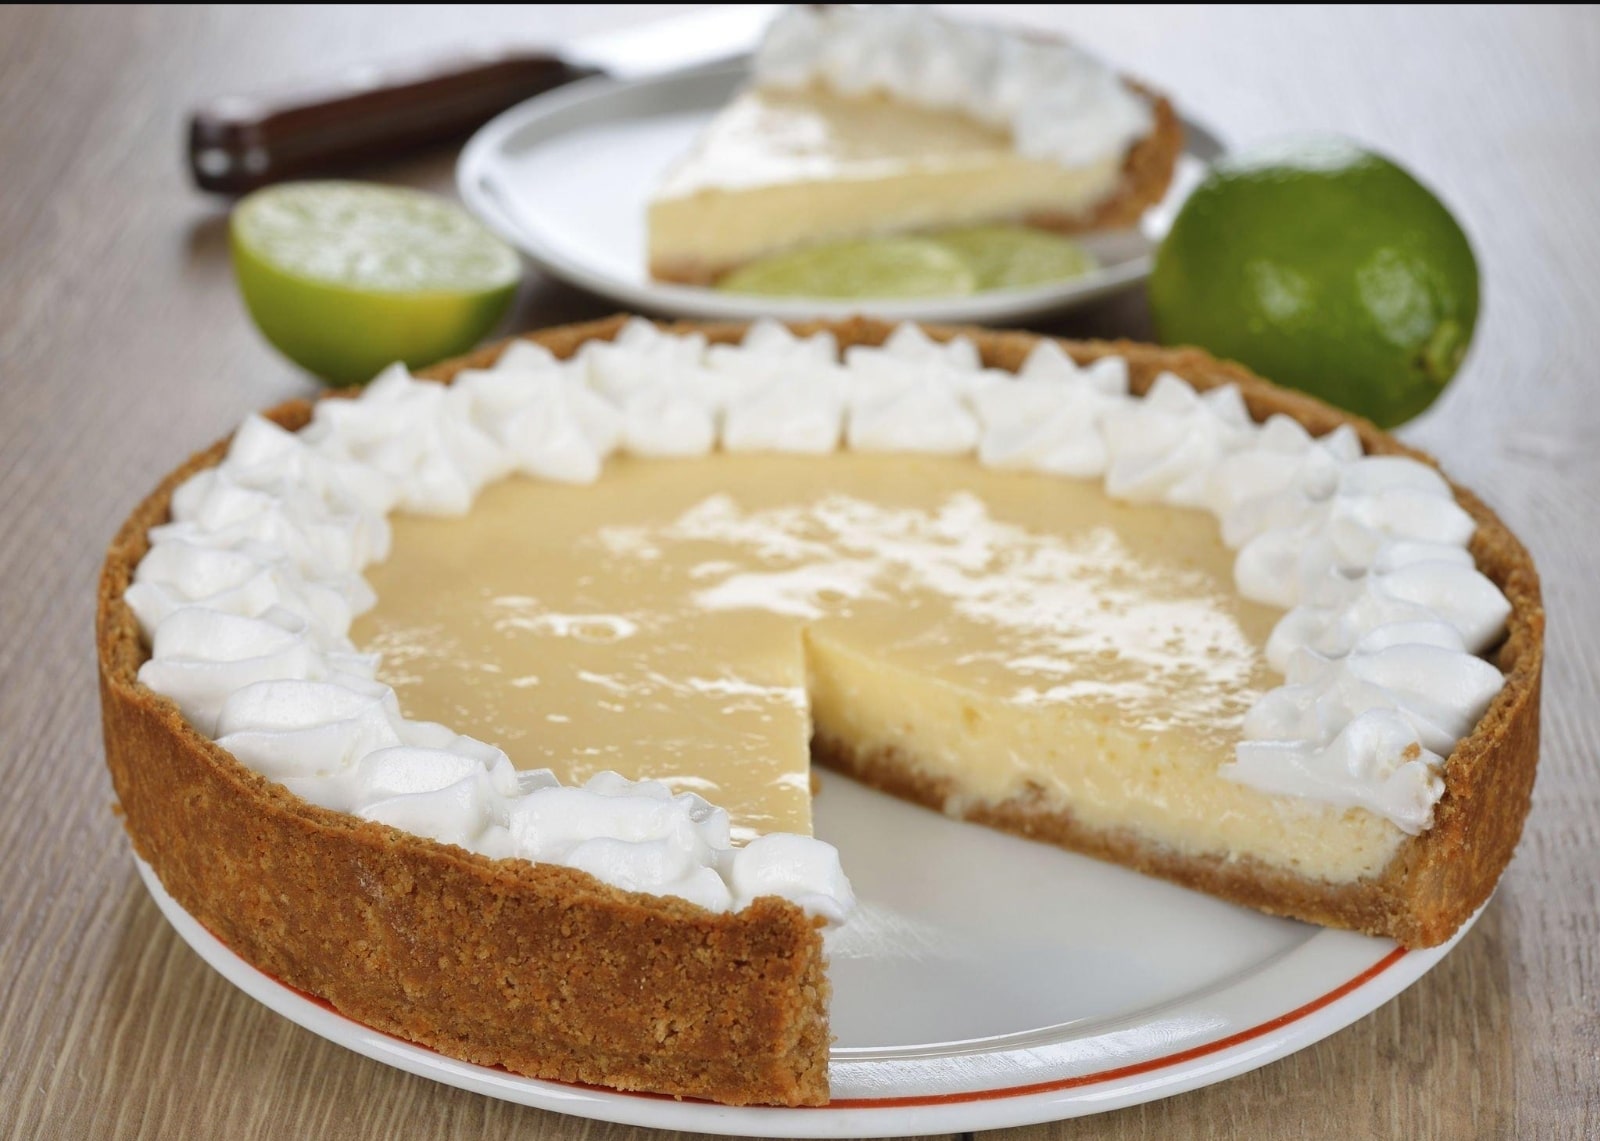 Can I substitute limes for Key lime pie?